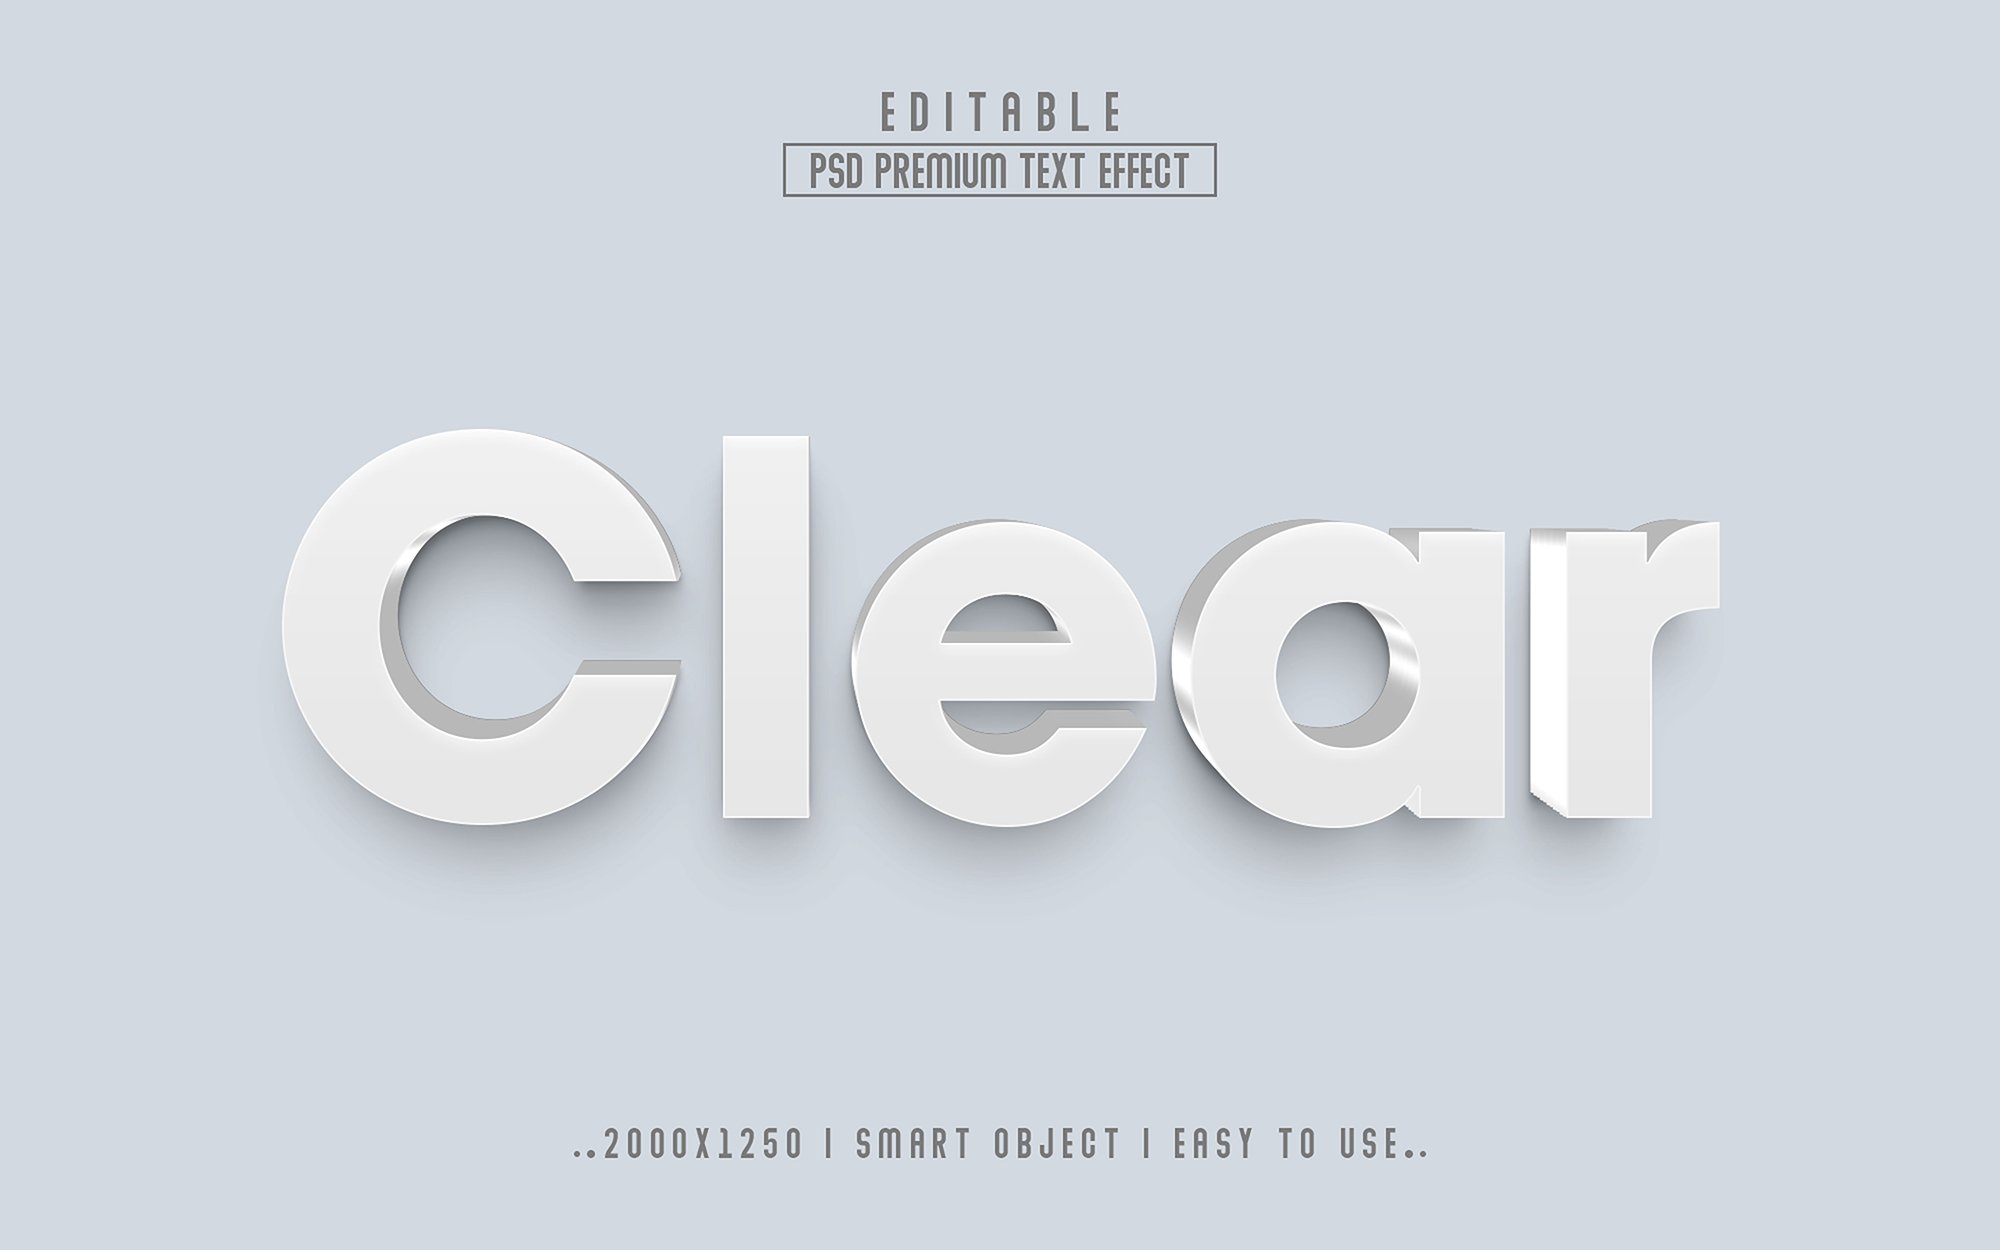 Clear 3D Editable Text Effect Stylecover image.